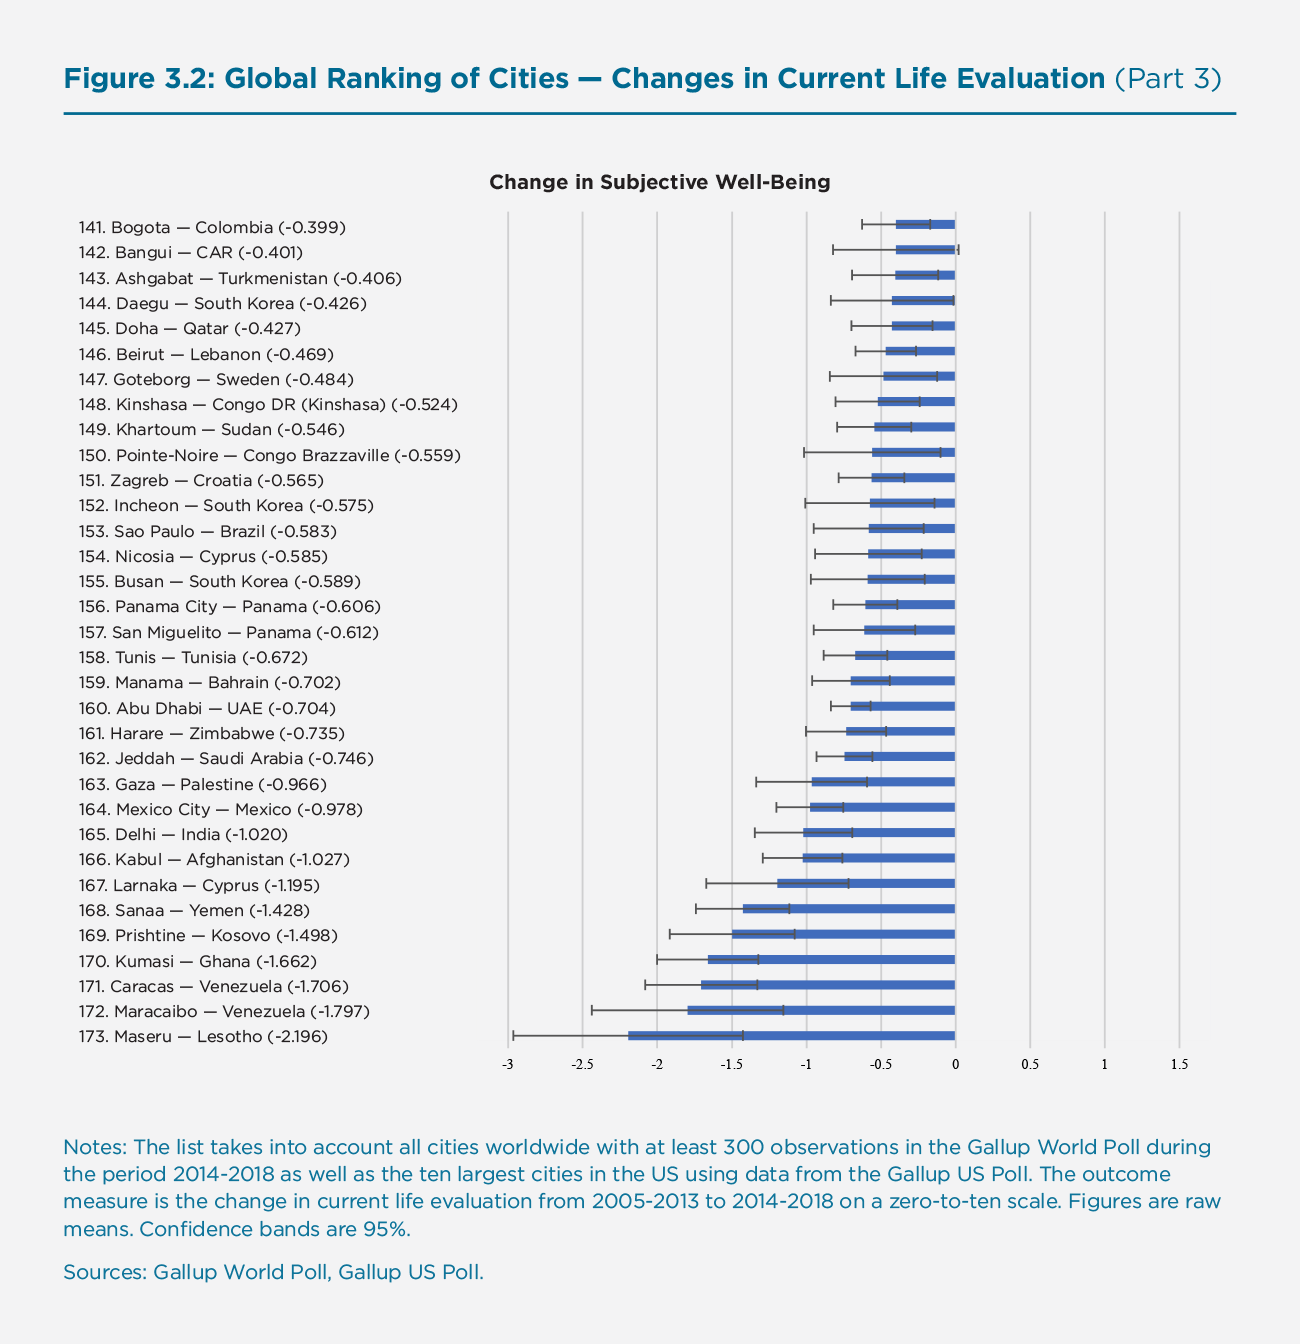 Figure 3.2: Global Ranking of Cities — Changes in Current Life Evaluation (Part 3)